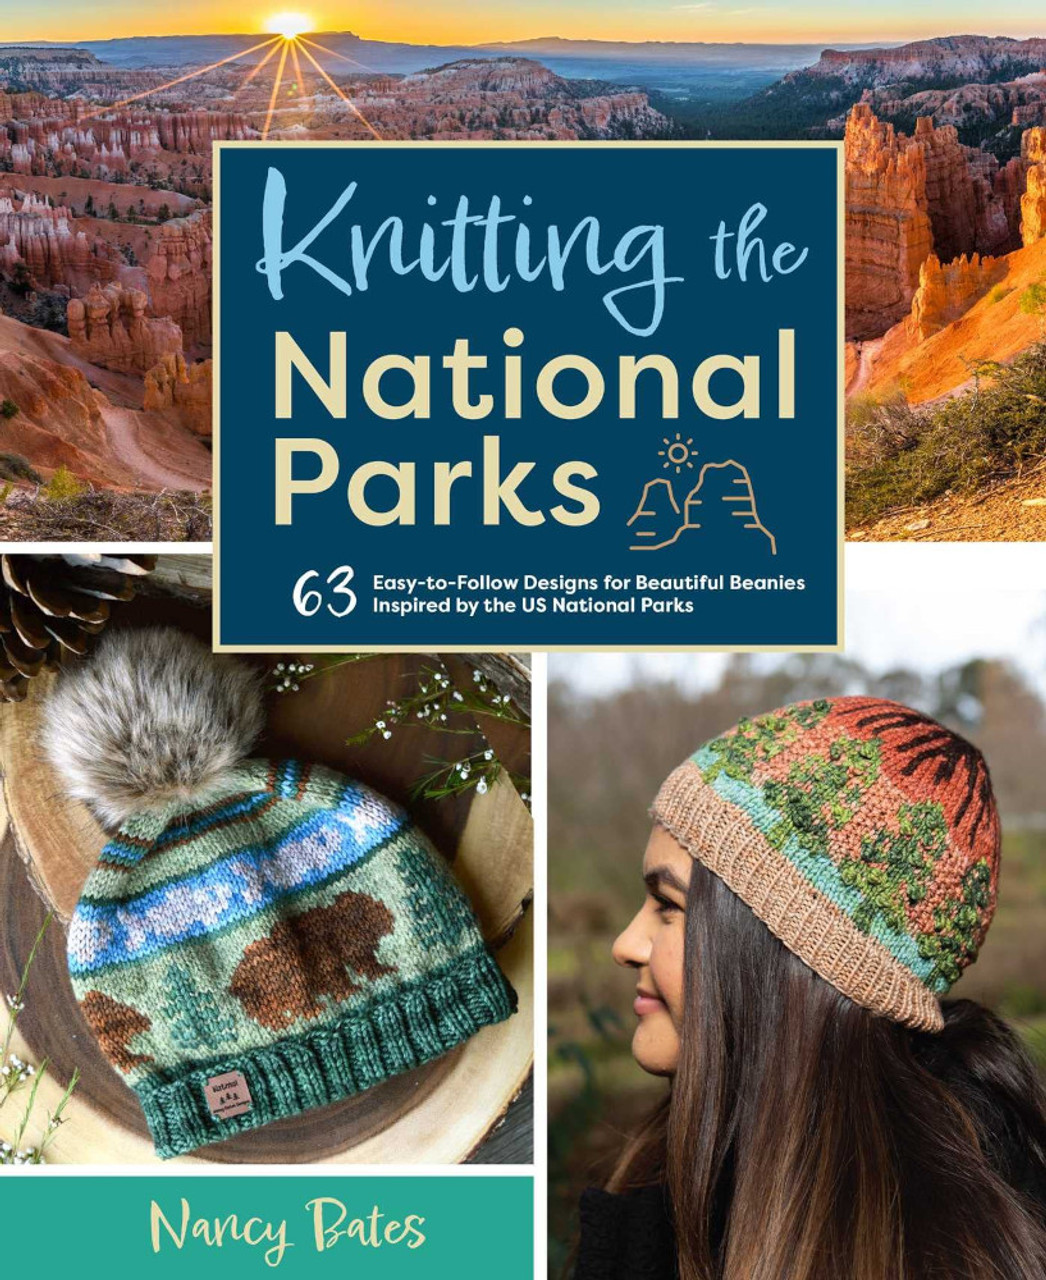 Creative Nation Knitting Kit for Beginners - Learn to Knit A Scarf